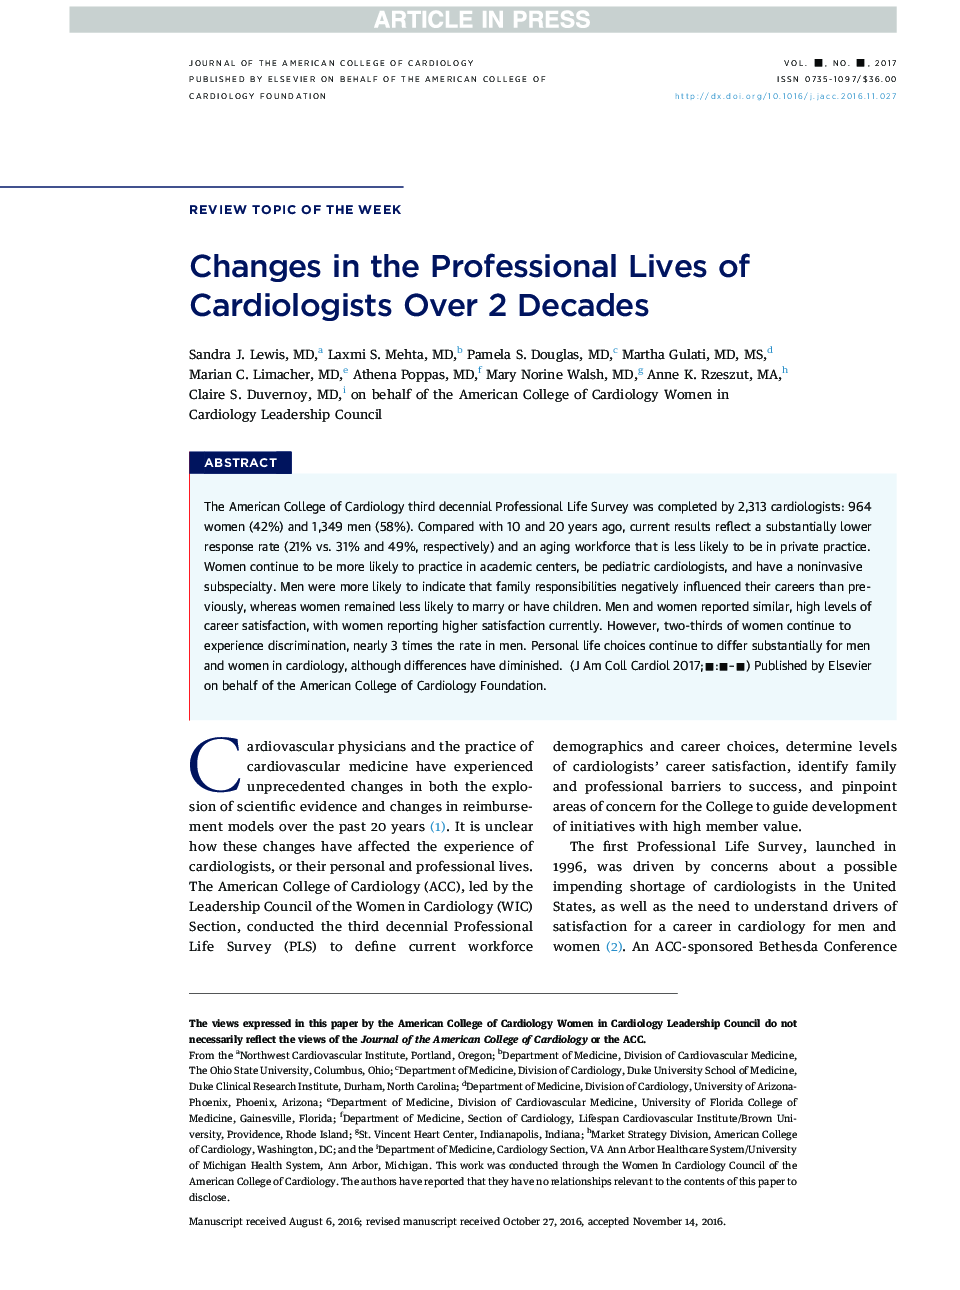 Changes in the Professional Lives of Cardiologists Over 2 Decades